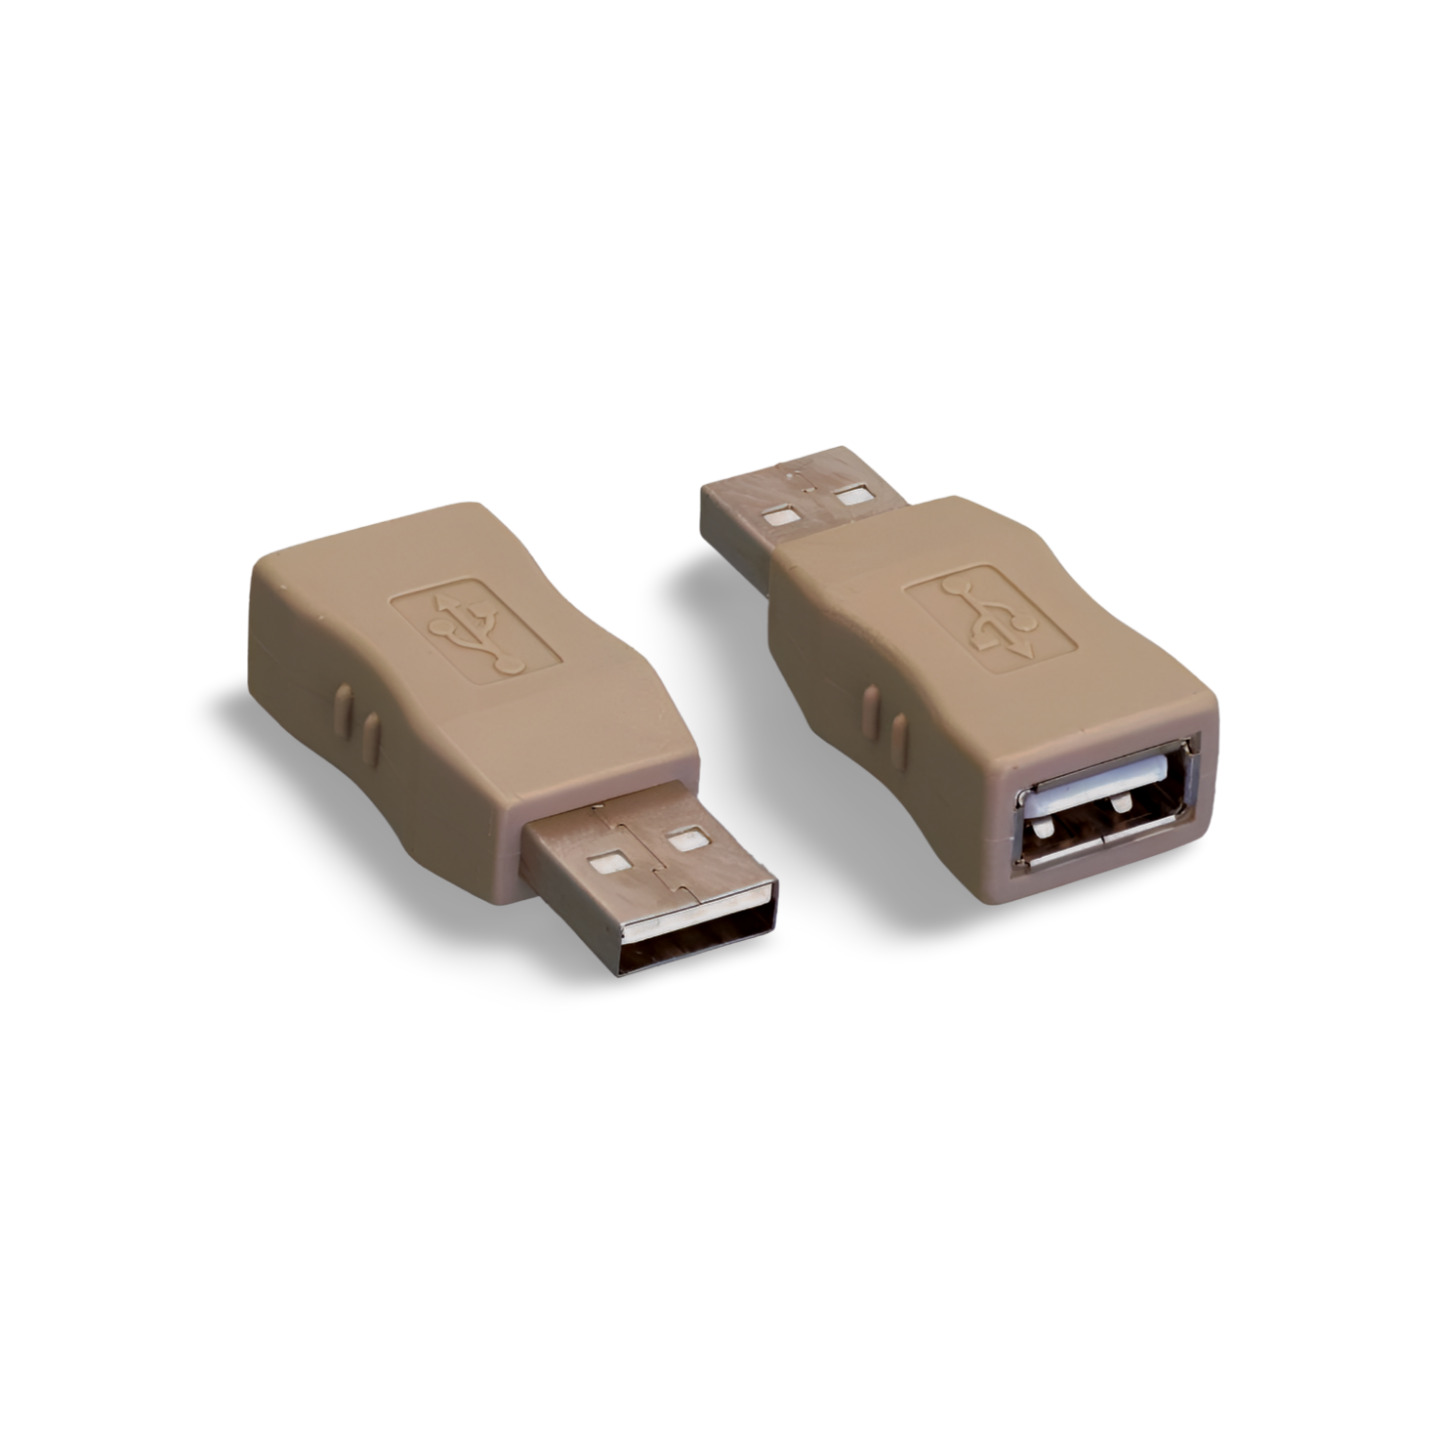 1in USB 2.0 Port Protector USB Type A Male to Type A Female - Beige